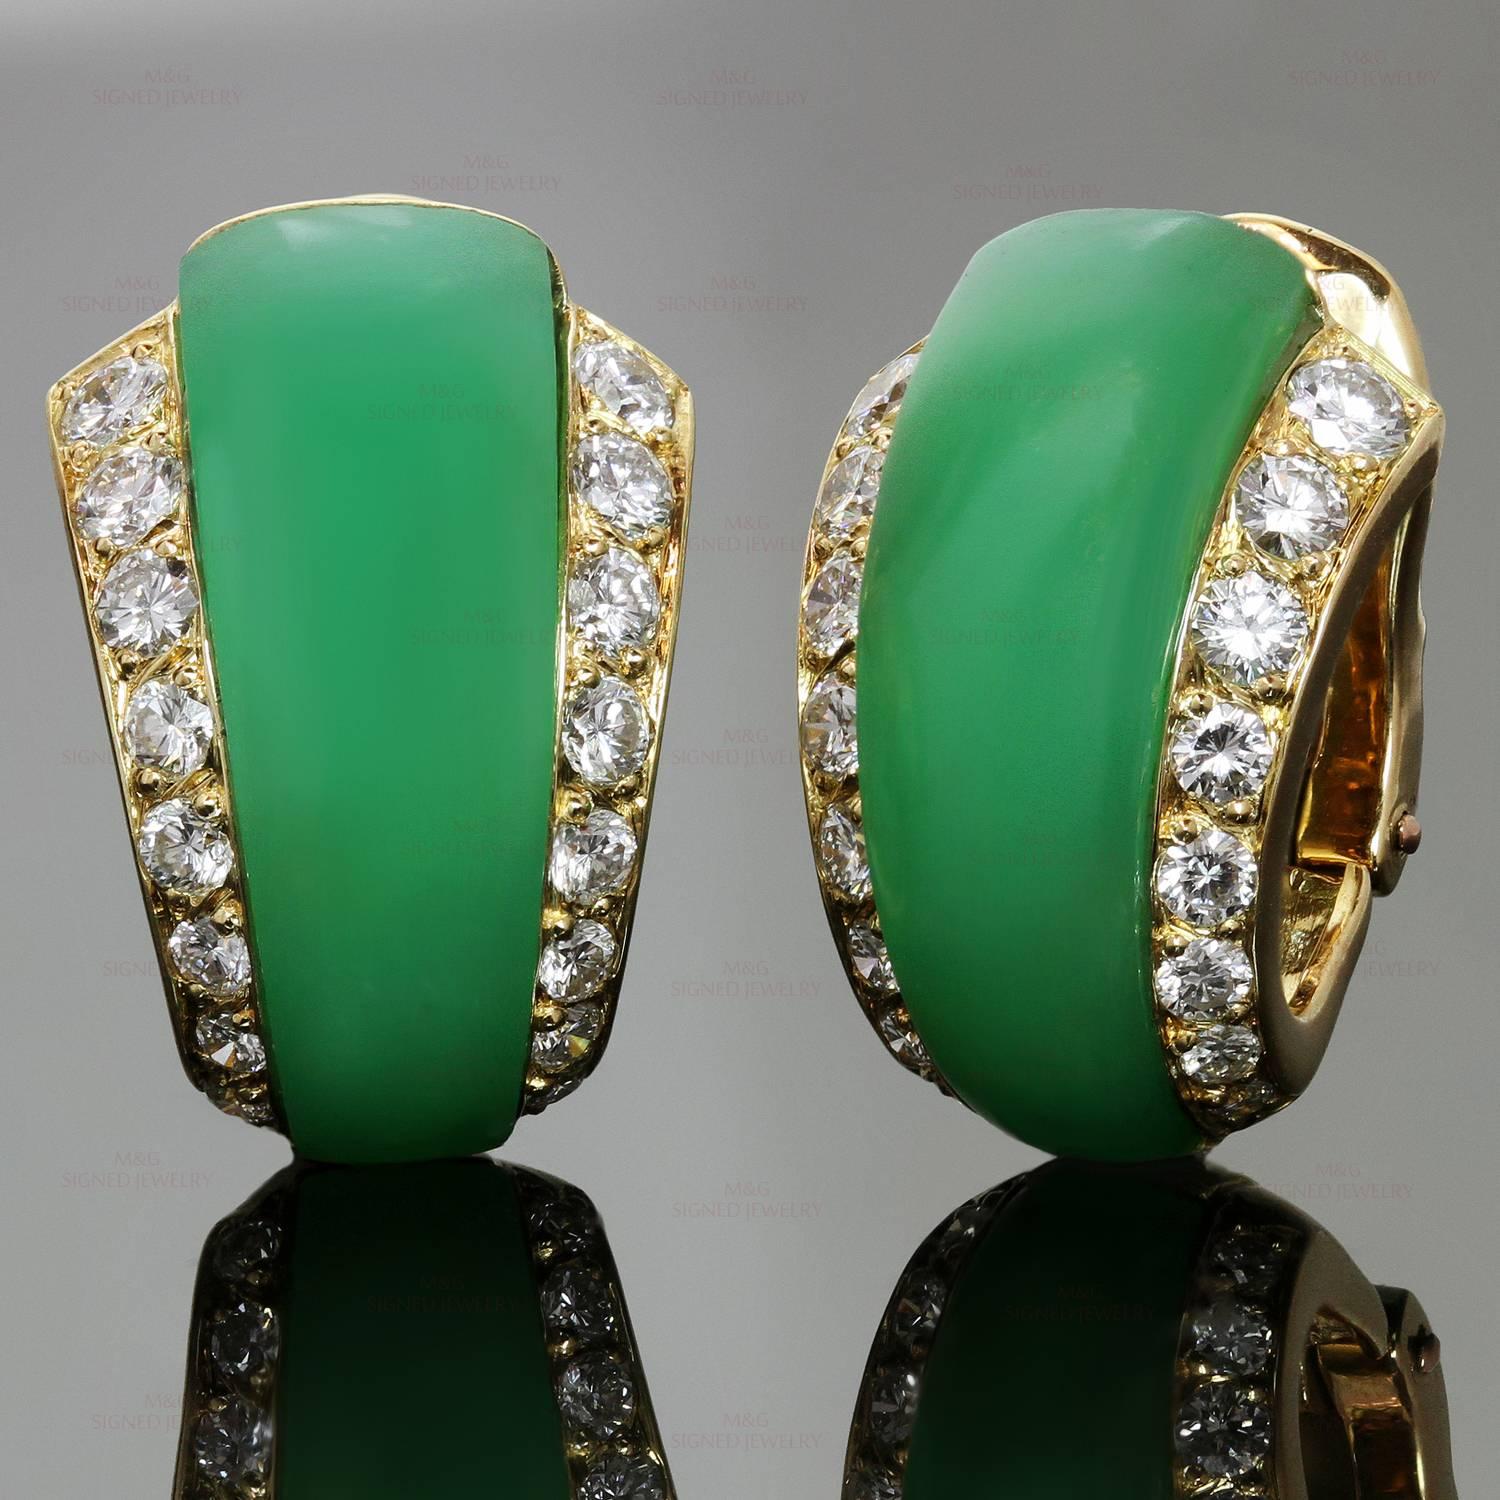 These fabulous Van Cleef & Arpels clip-on earrings are crafted in 18k yellow gold, set with carved green chrysoprase and accented with sparkling round brilliant-cut diamond borders. Made in France circa 1988. Measurements: 0.47" (12mm)